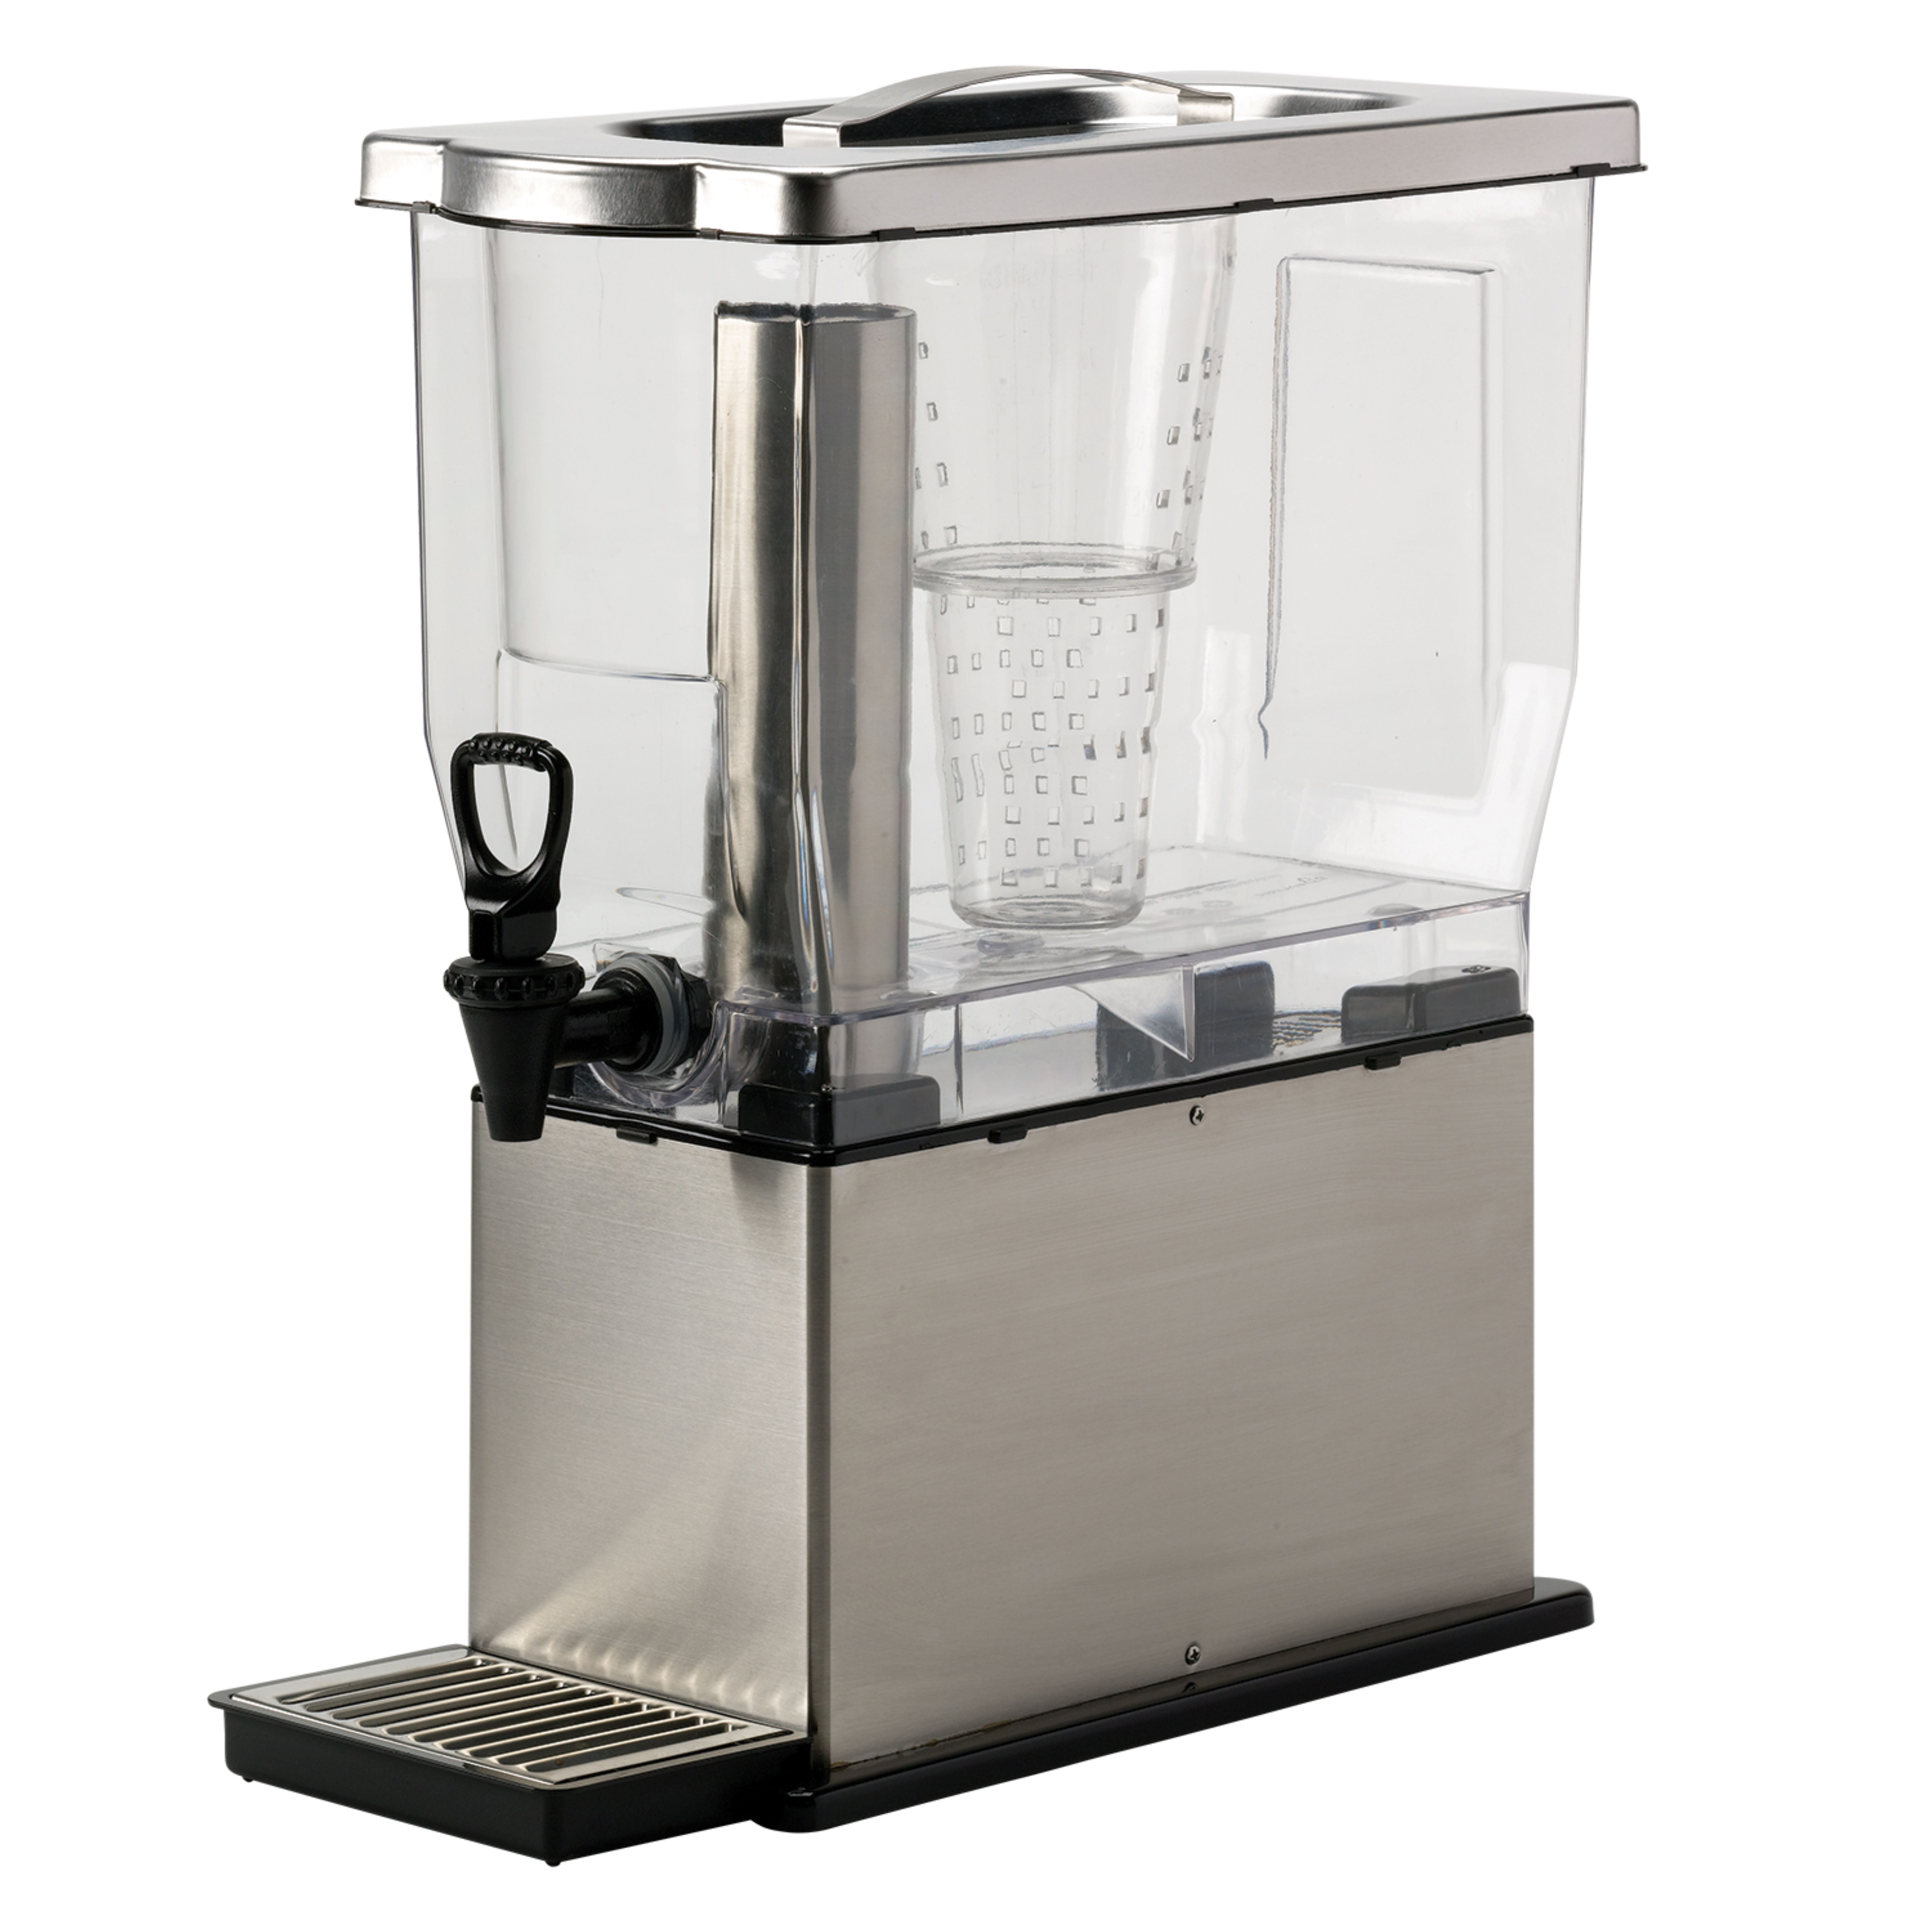 VEVOR Commercial Beverage Dispenser 4.8 Gallon,Ice Tea Drink Machine18  Liter 200W,Stainless Steel Food Grade Material Commercial Juice dispenser,  110V Equipped with Thermostat Controller 